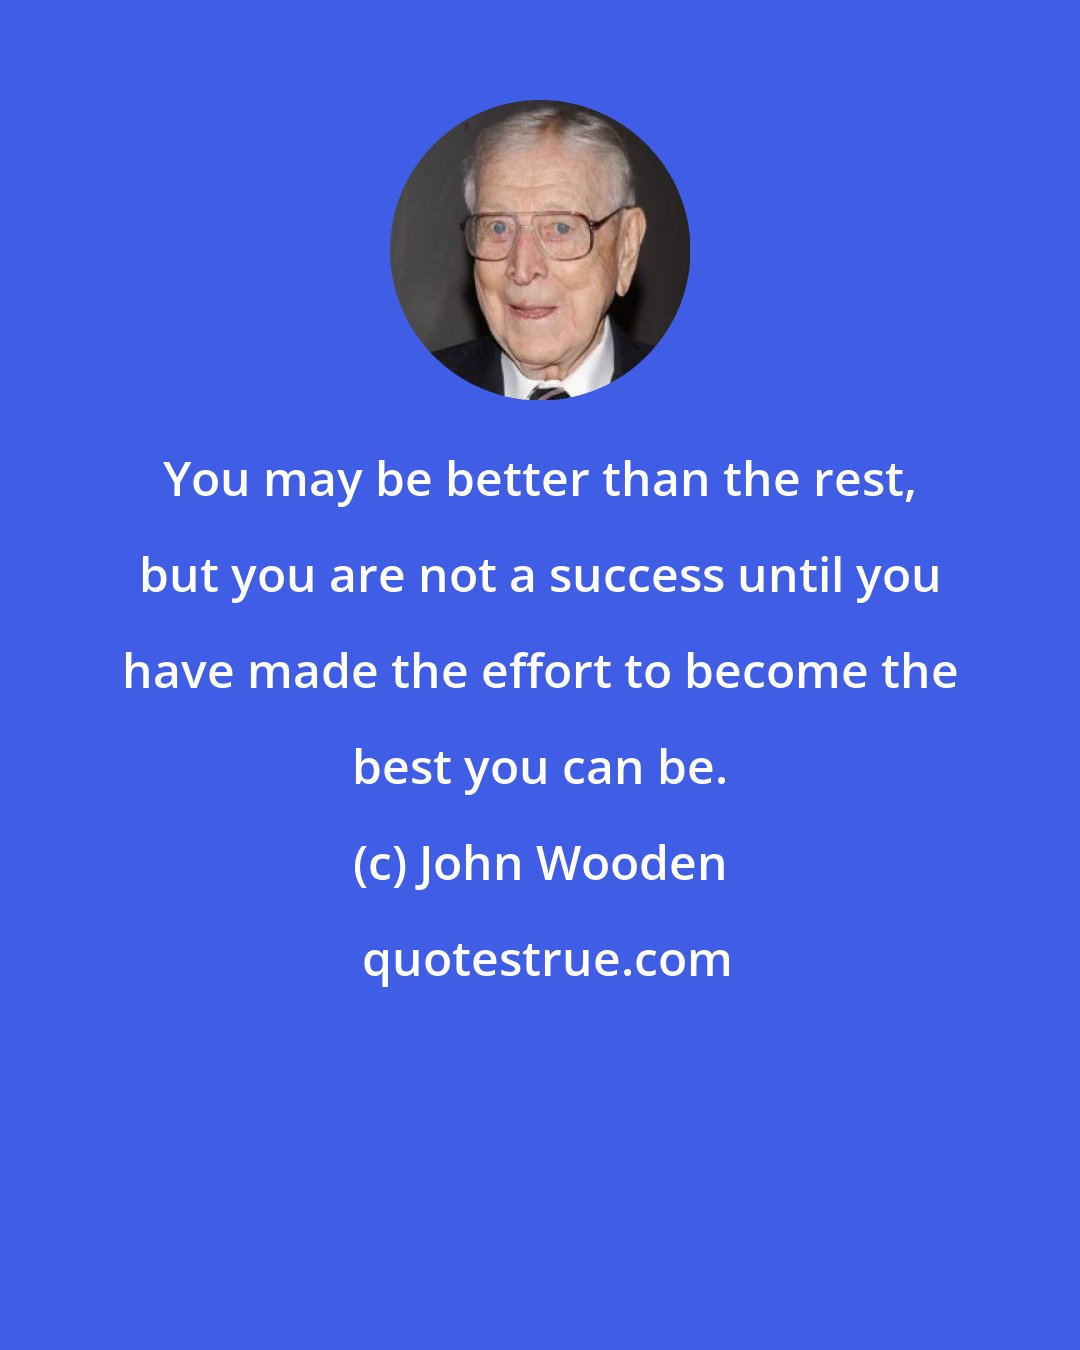 John Wooden: You may be better than the rest, but you are not a success until you have made the effort to become the best you can be.